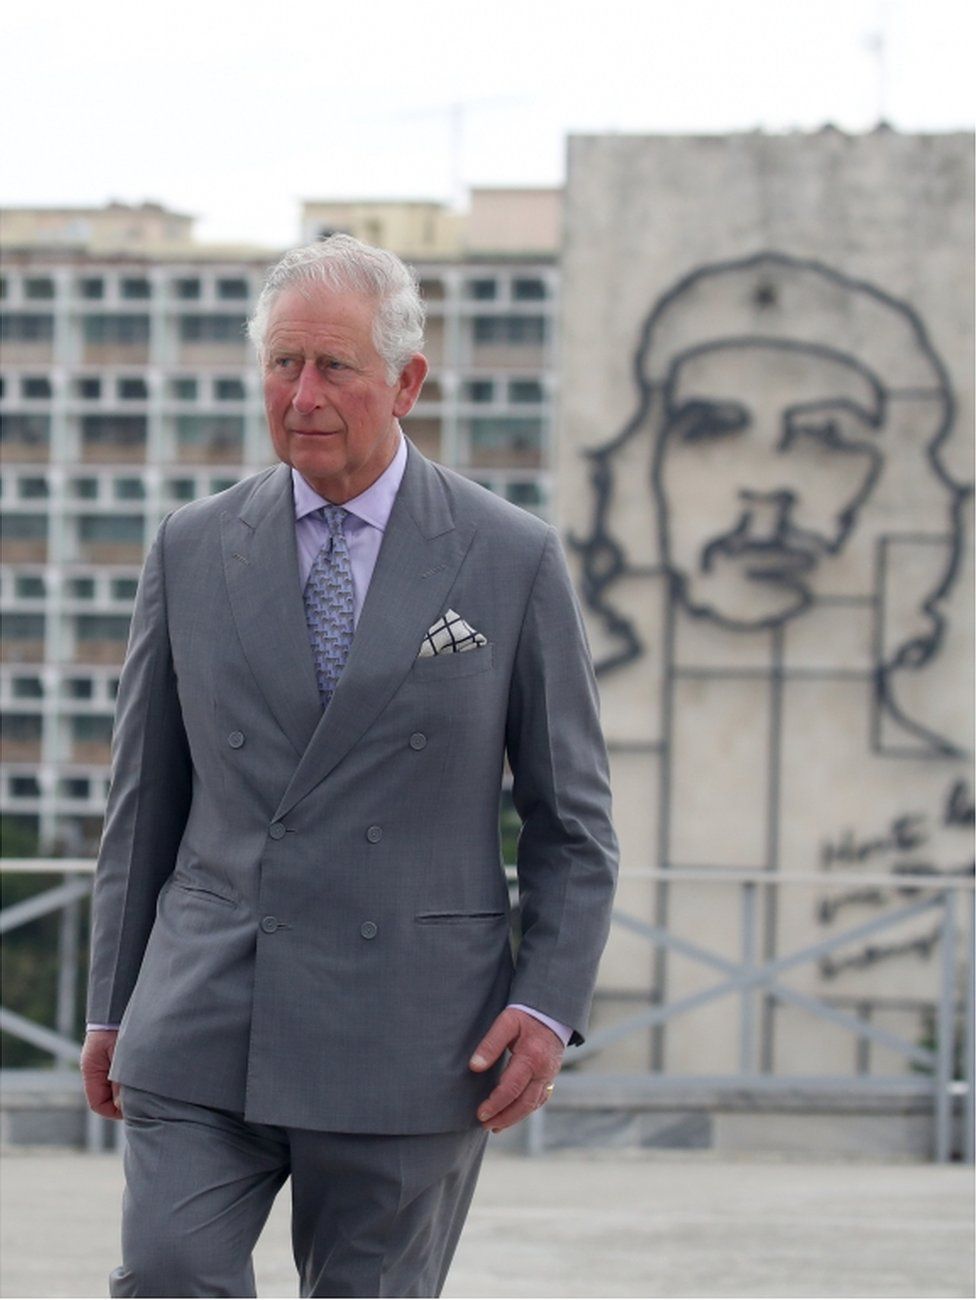 Prince Charles stands near an image of Ernesto "Che" Guevara